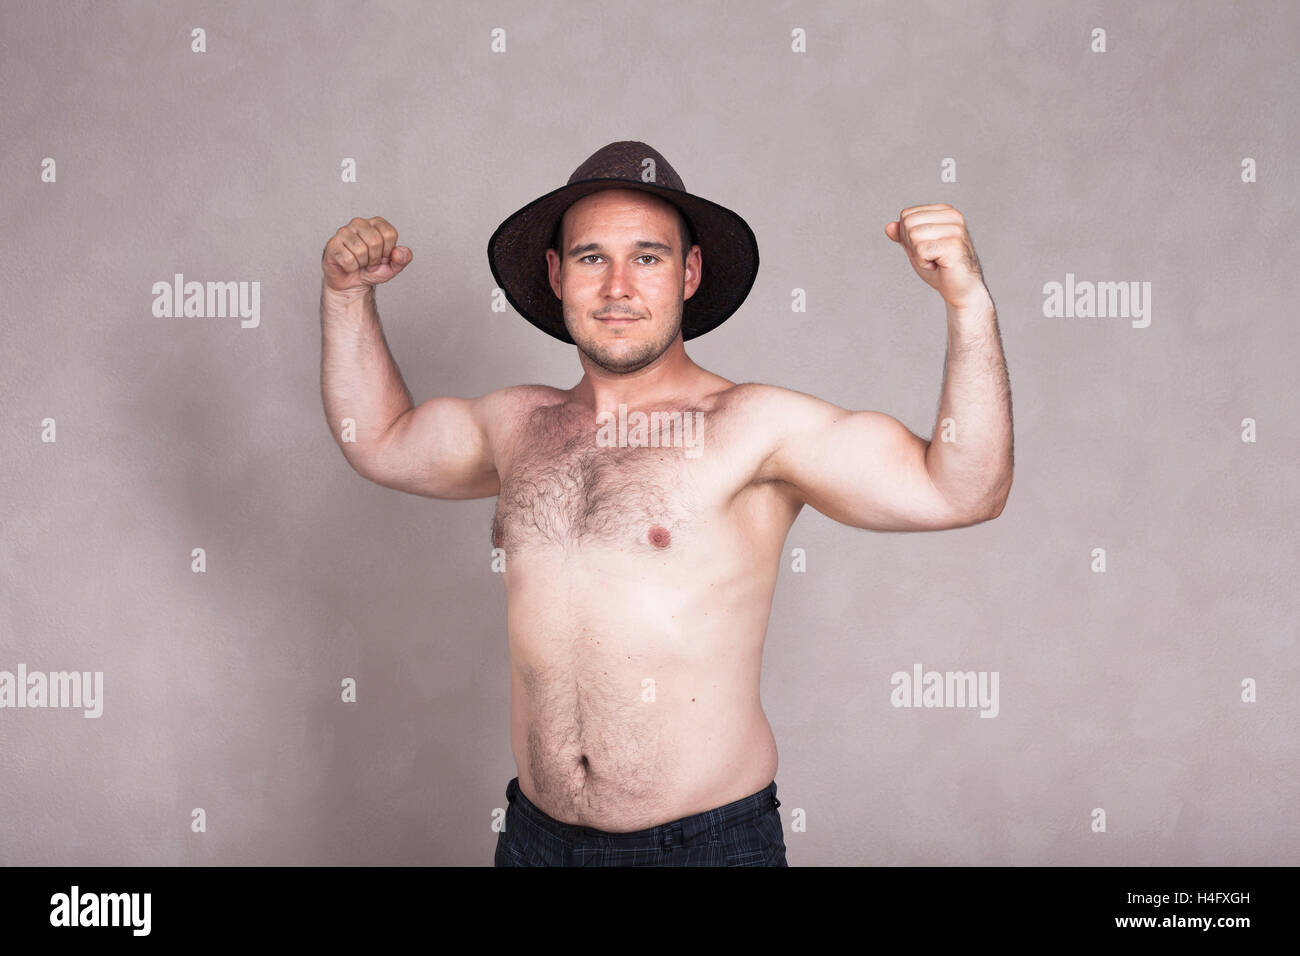 Shirtless man in hat posing and showing his strong arms and hairy body. Stock Photo